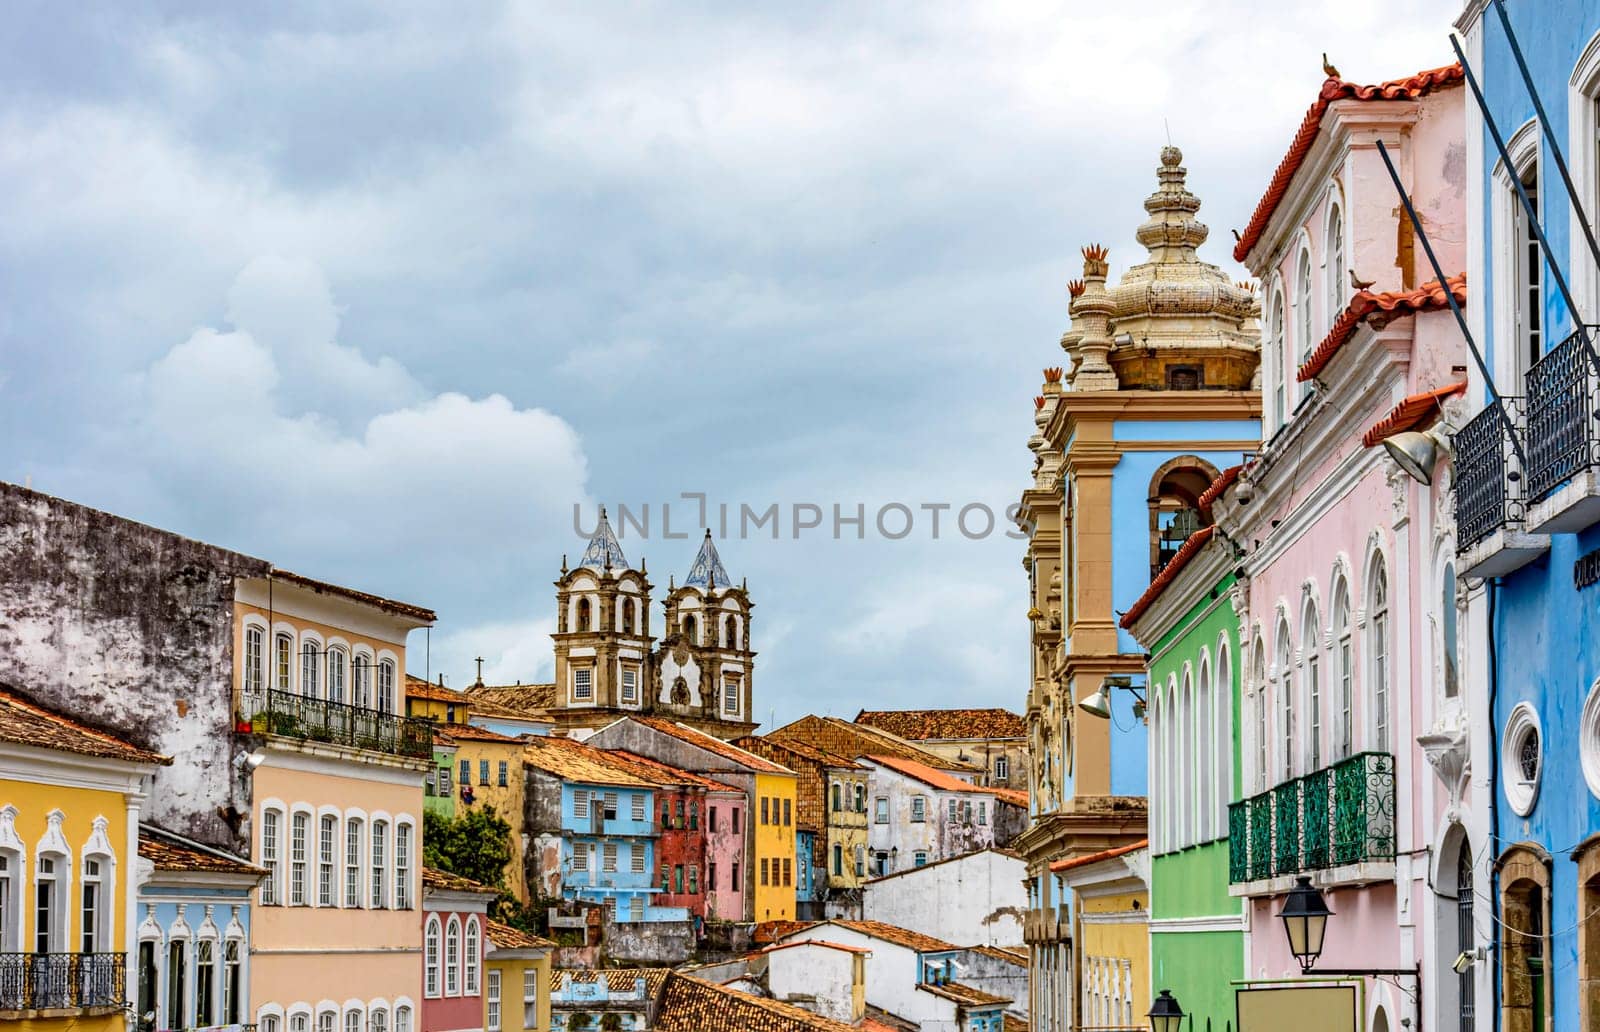 Colorful historical colonial houses facades and antique church towers in baroque and colonial style in the famous Pelourinho district of Salvador, Bahia